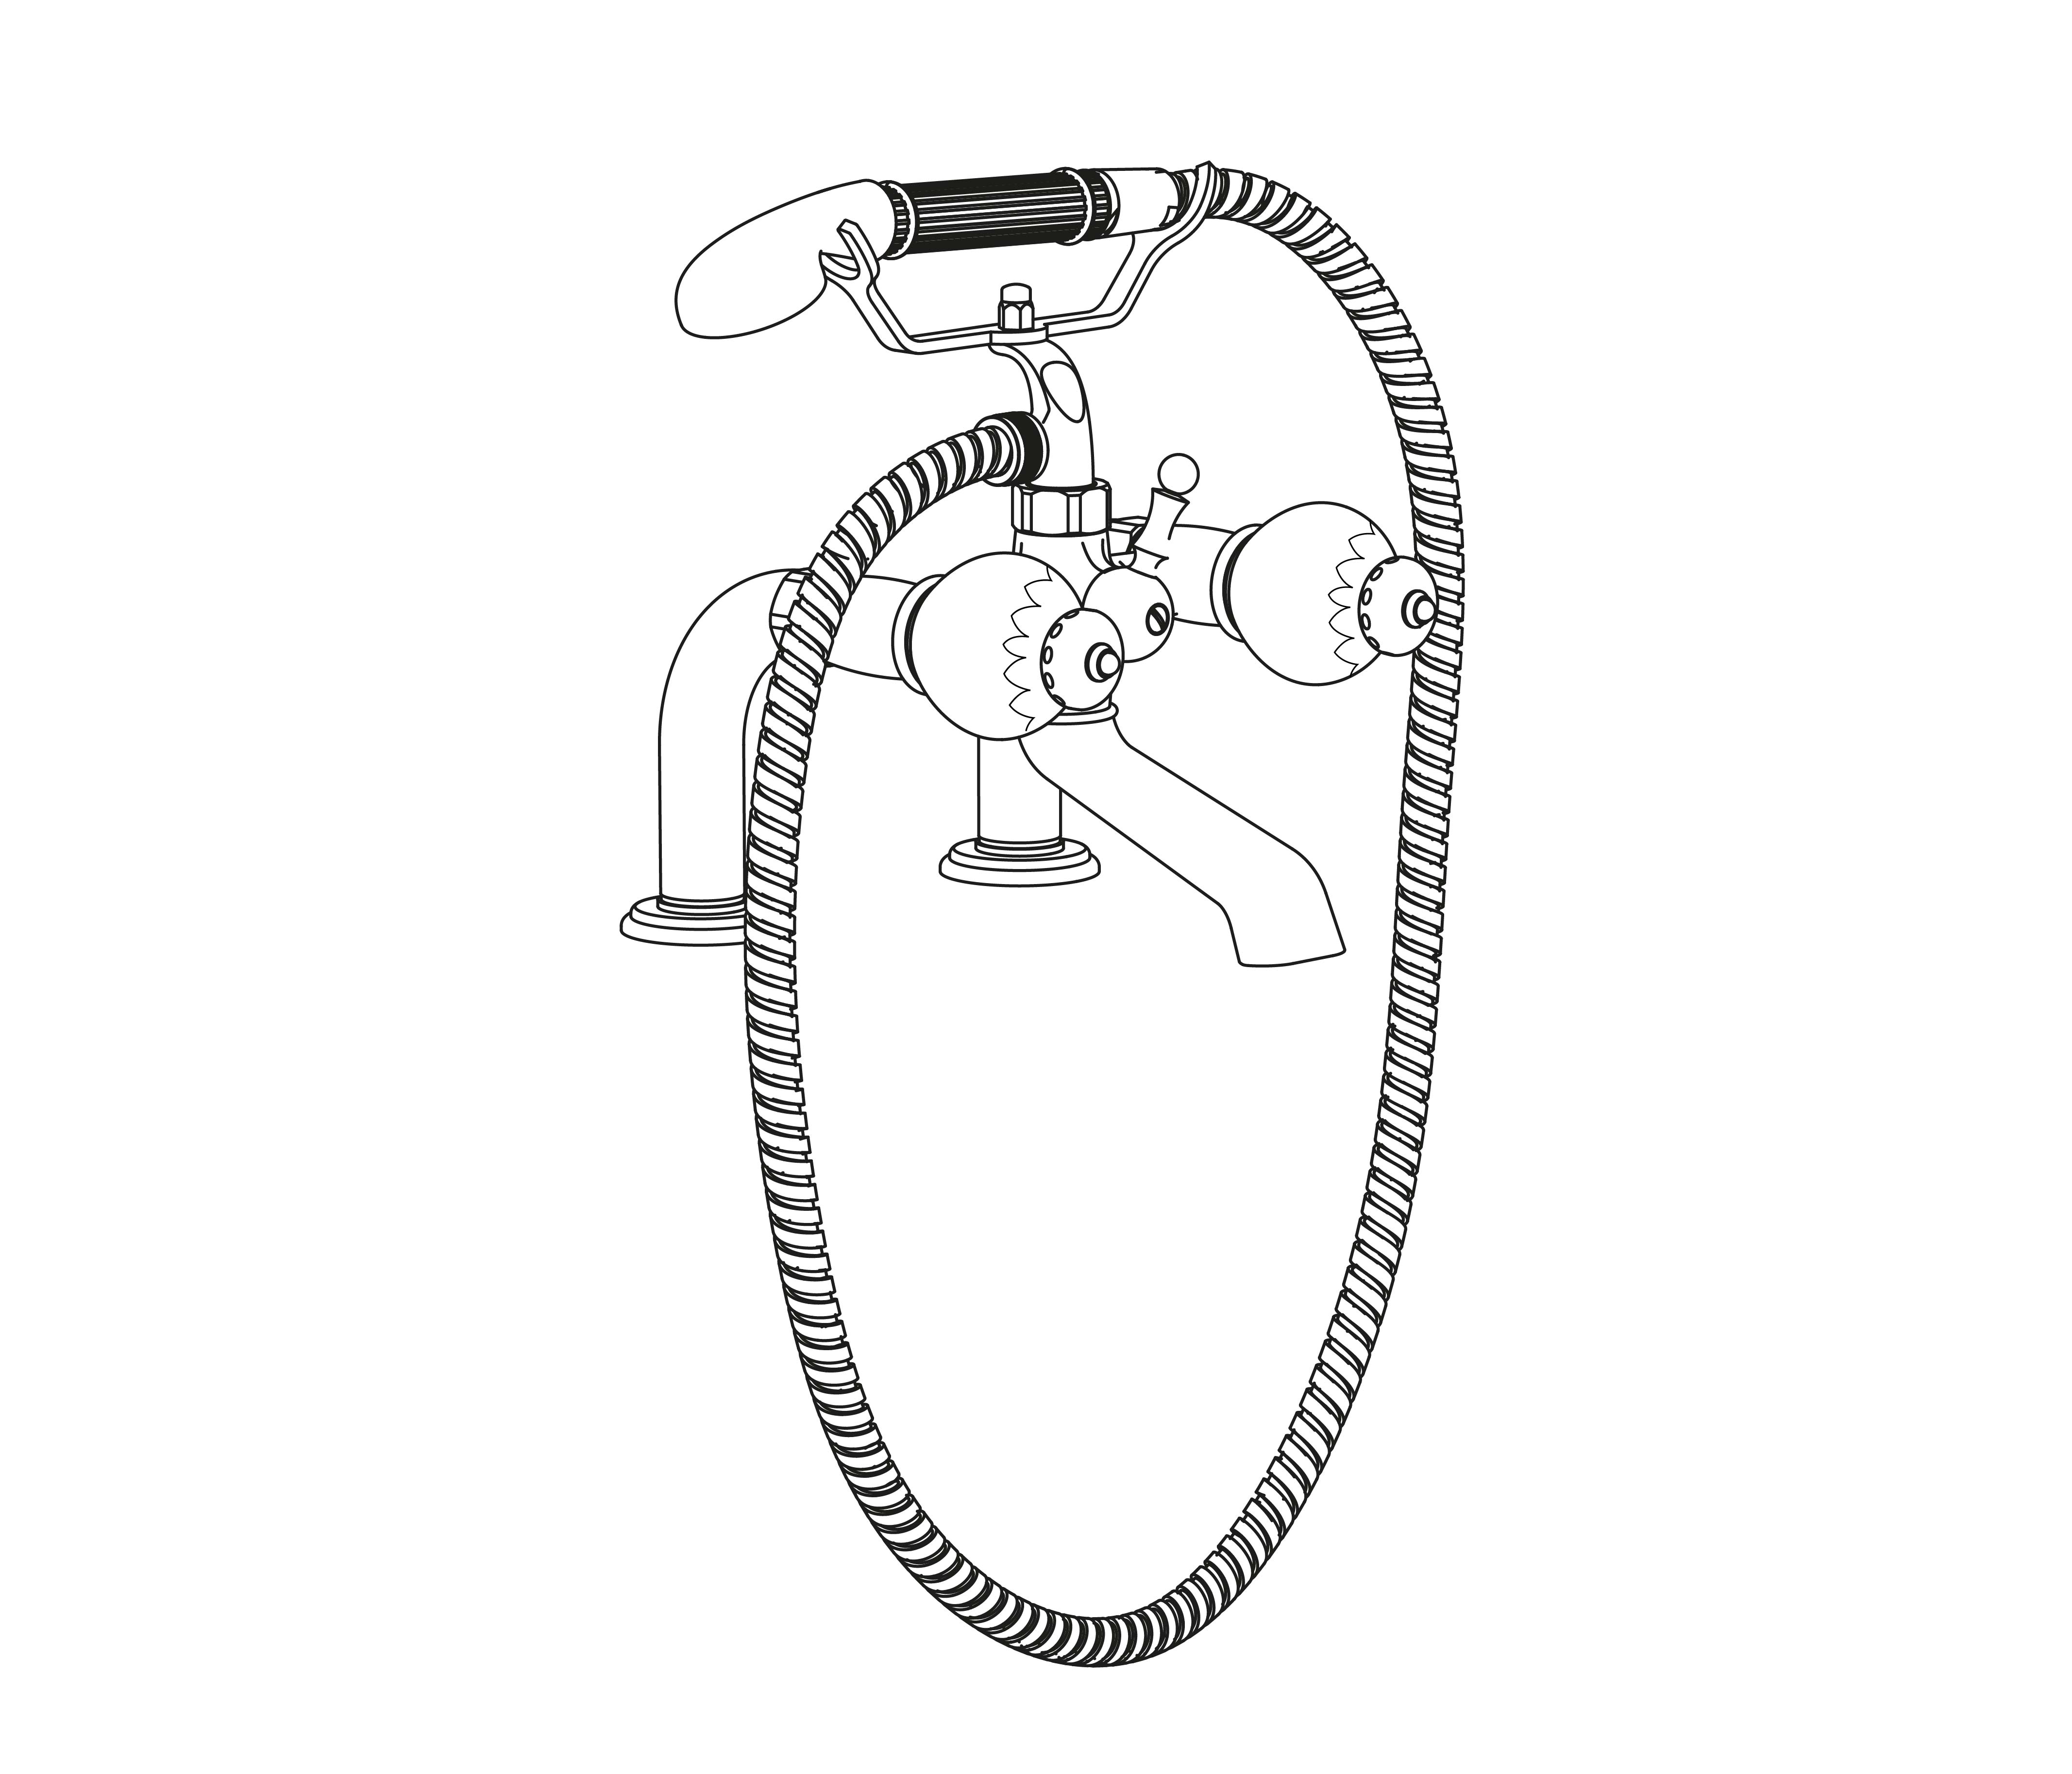 S180-3306 Rim mounted bath and shower mixer